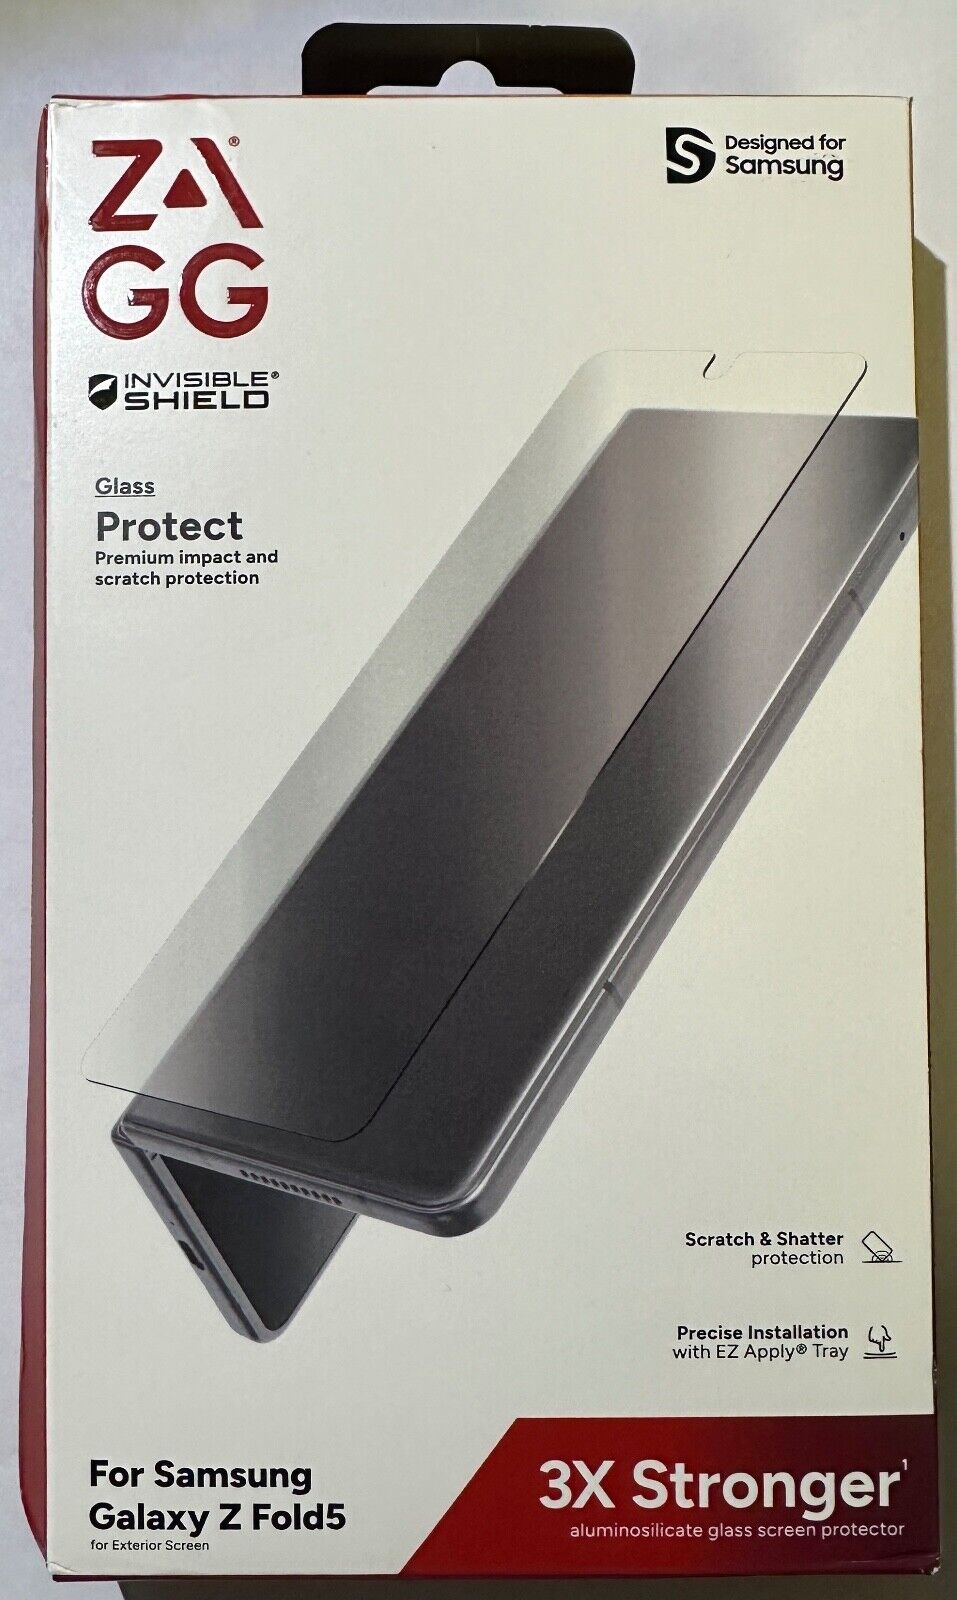 NEW ZAGG Invisibleshield Glass Screen Protector for Samsung Galaxy Z Fold5 Only